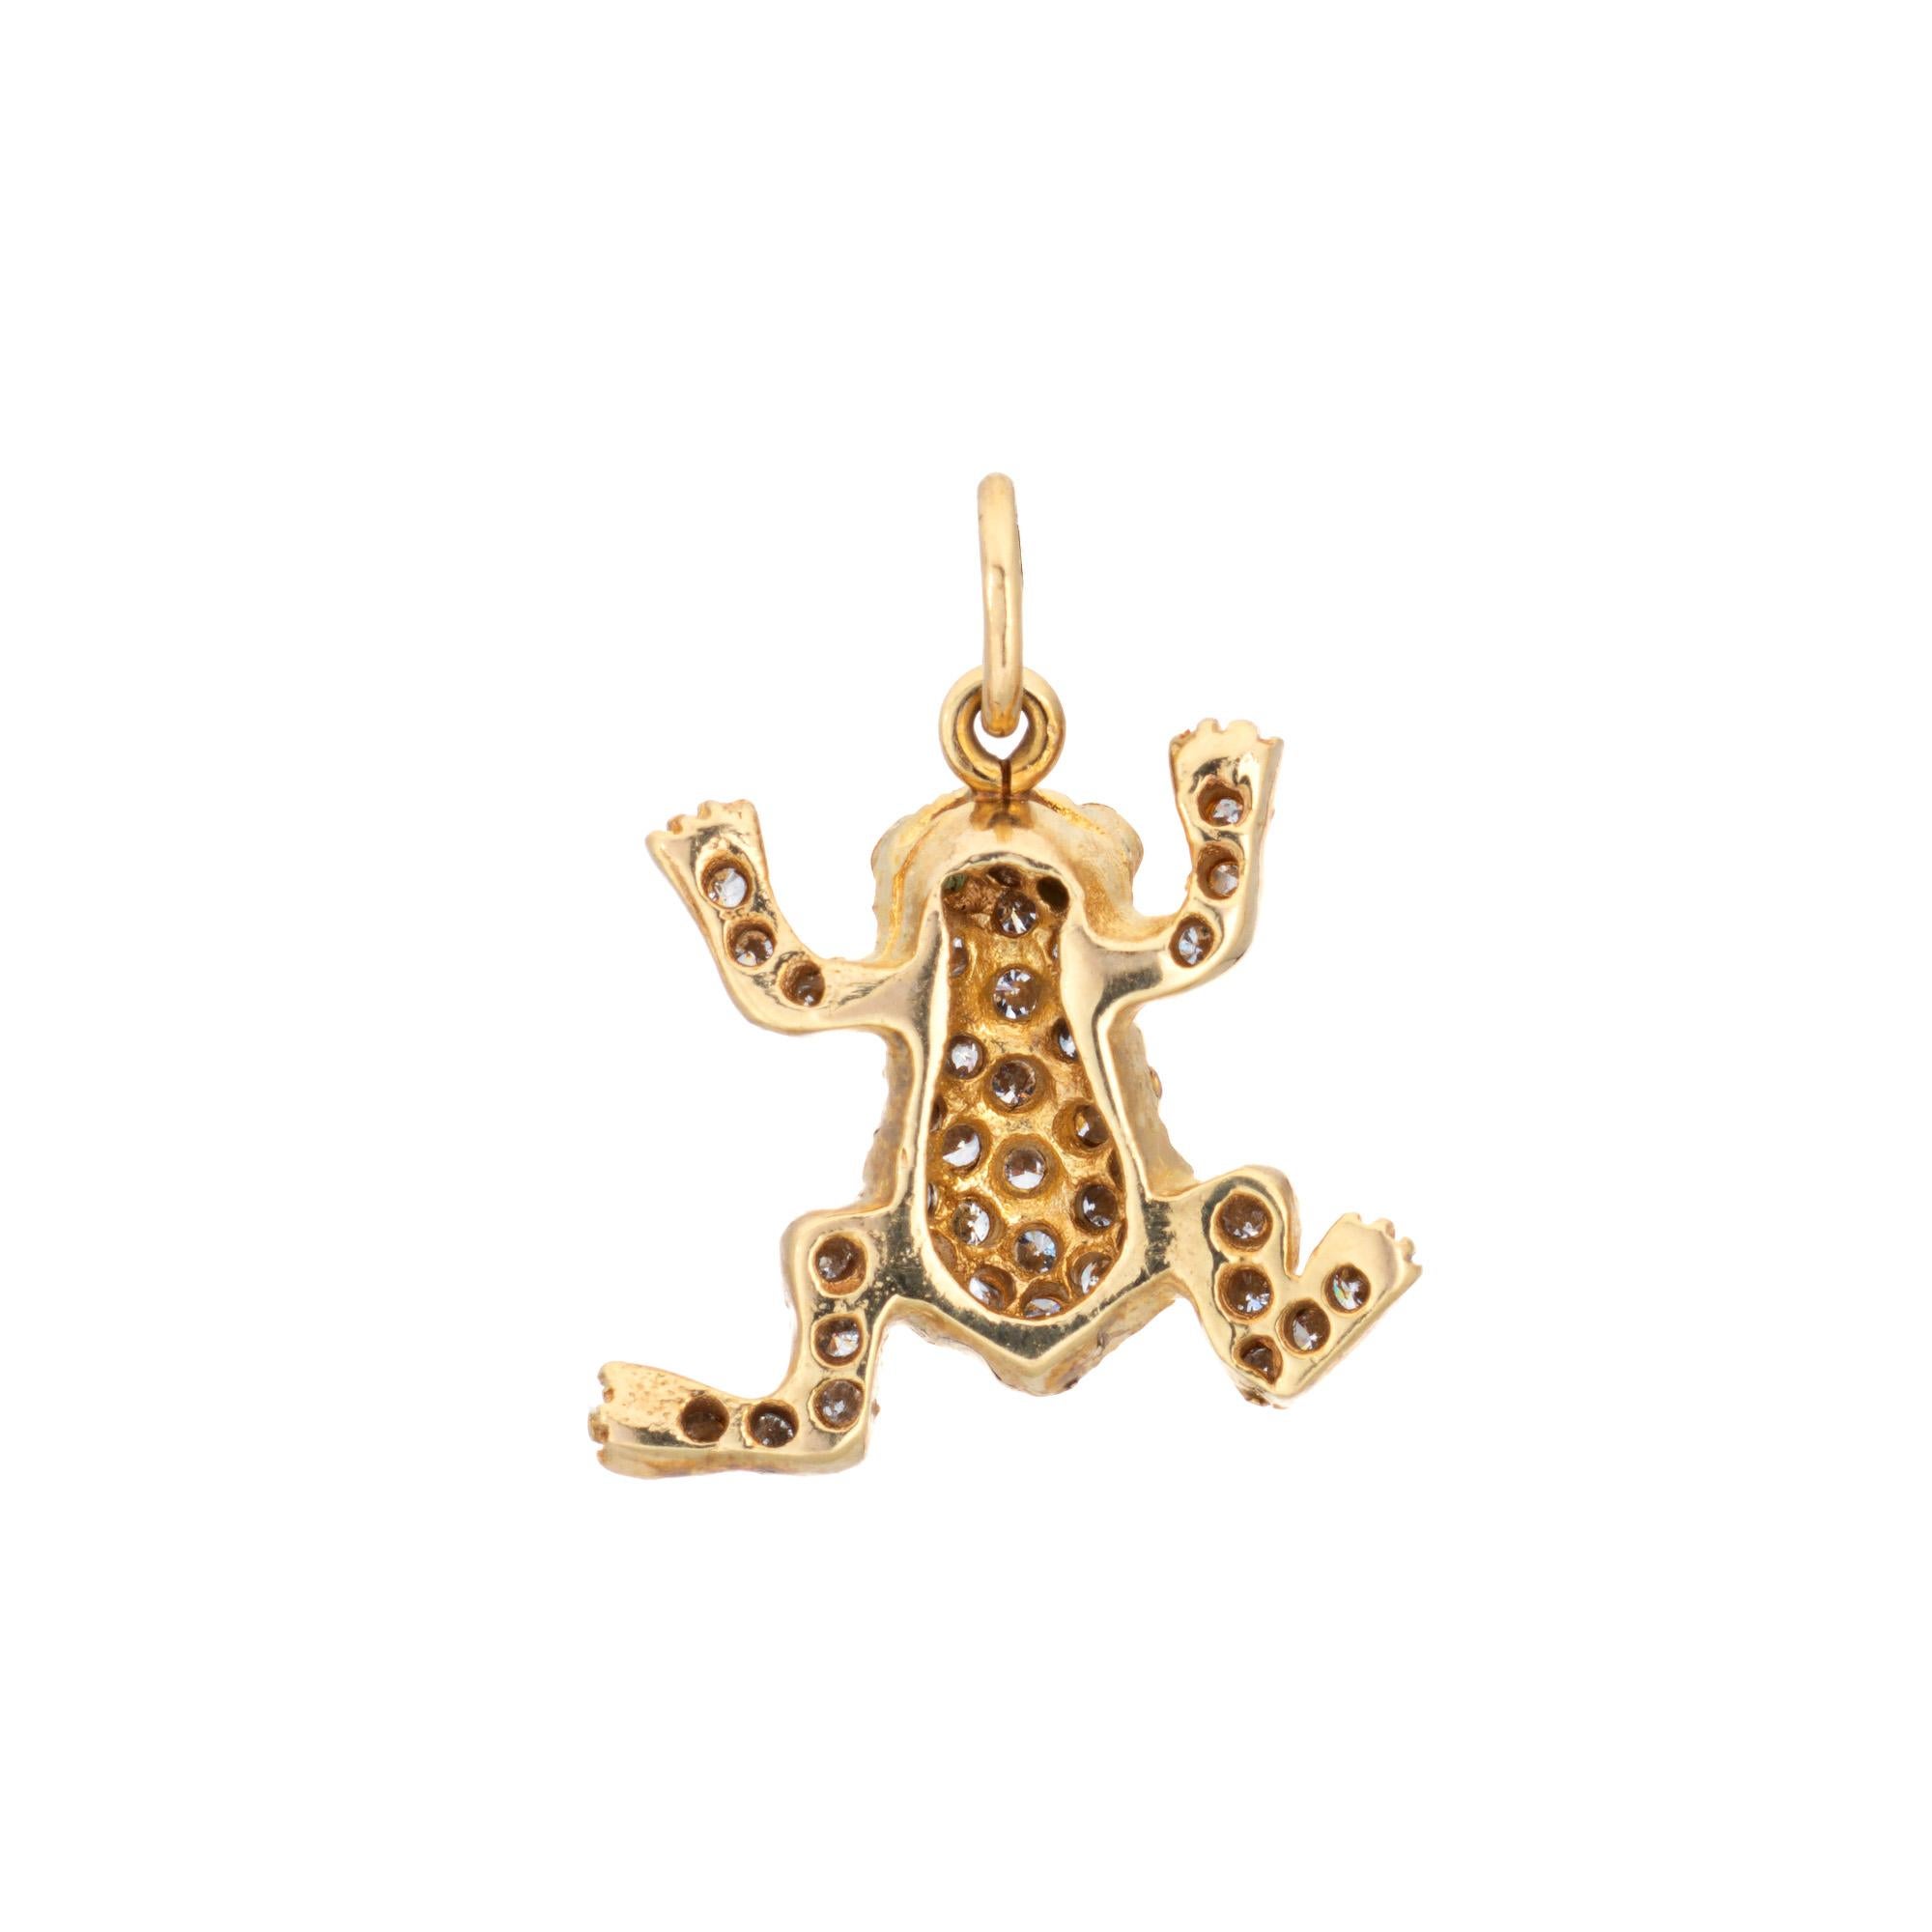 Finely detailed vintage diamond frog charm crafted in 18k yellow gold.  

Round brilliant cut diamonds total an estimated 0.20 carats (estimated at H-I color and VS2-SI2 clarity). Two emeralds total an estimated 0.02 carats. 

The sweet and petite